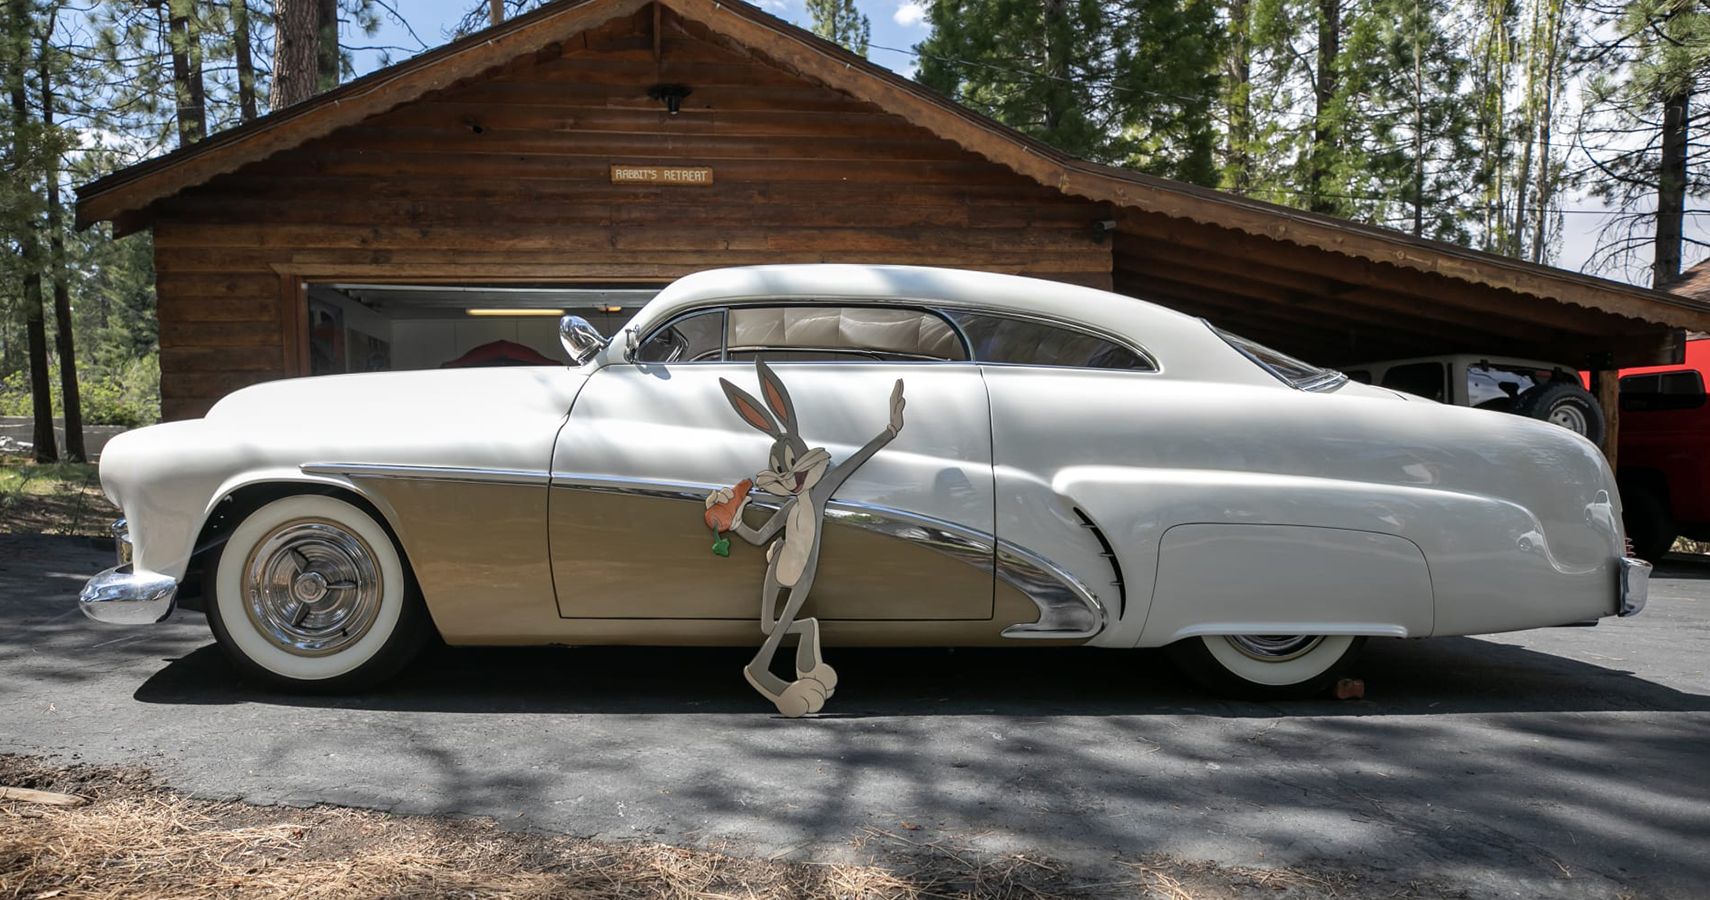 Dick Dean pearly white 1951 Mercury Custom with Bugs Bunny